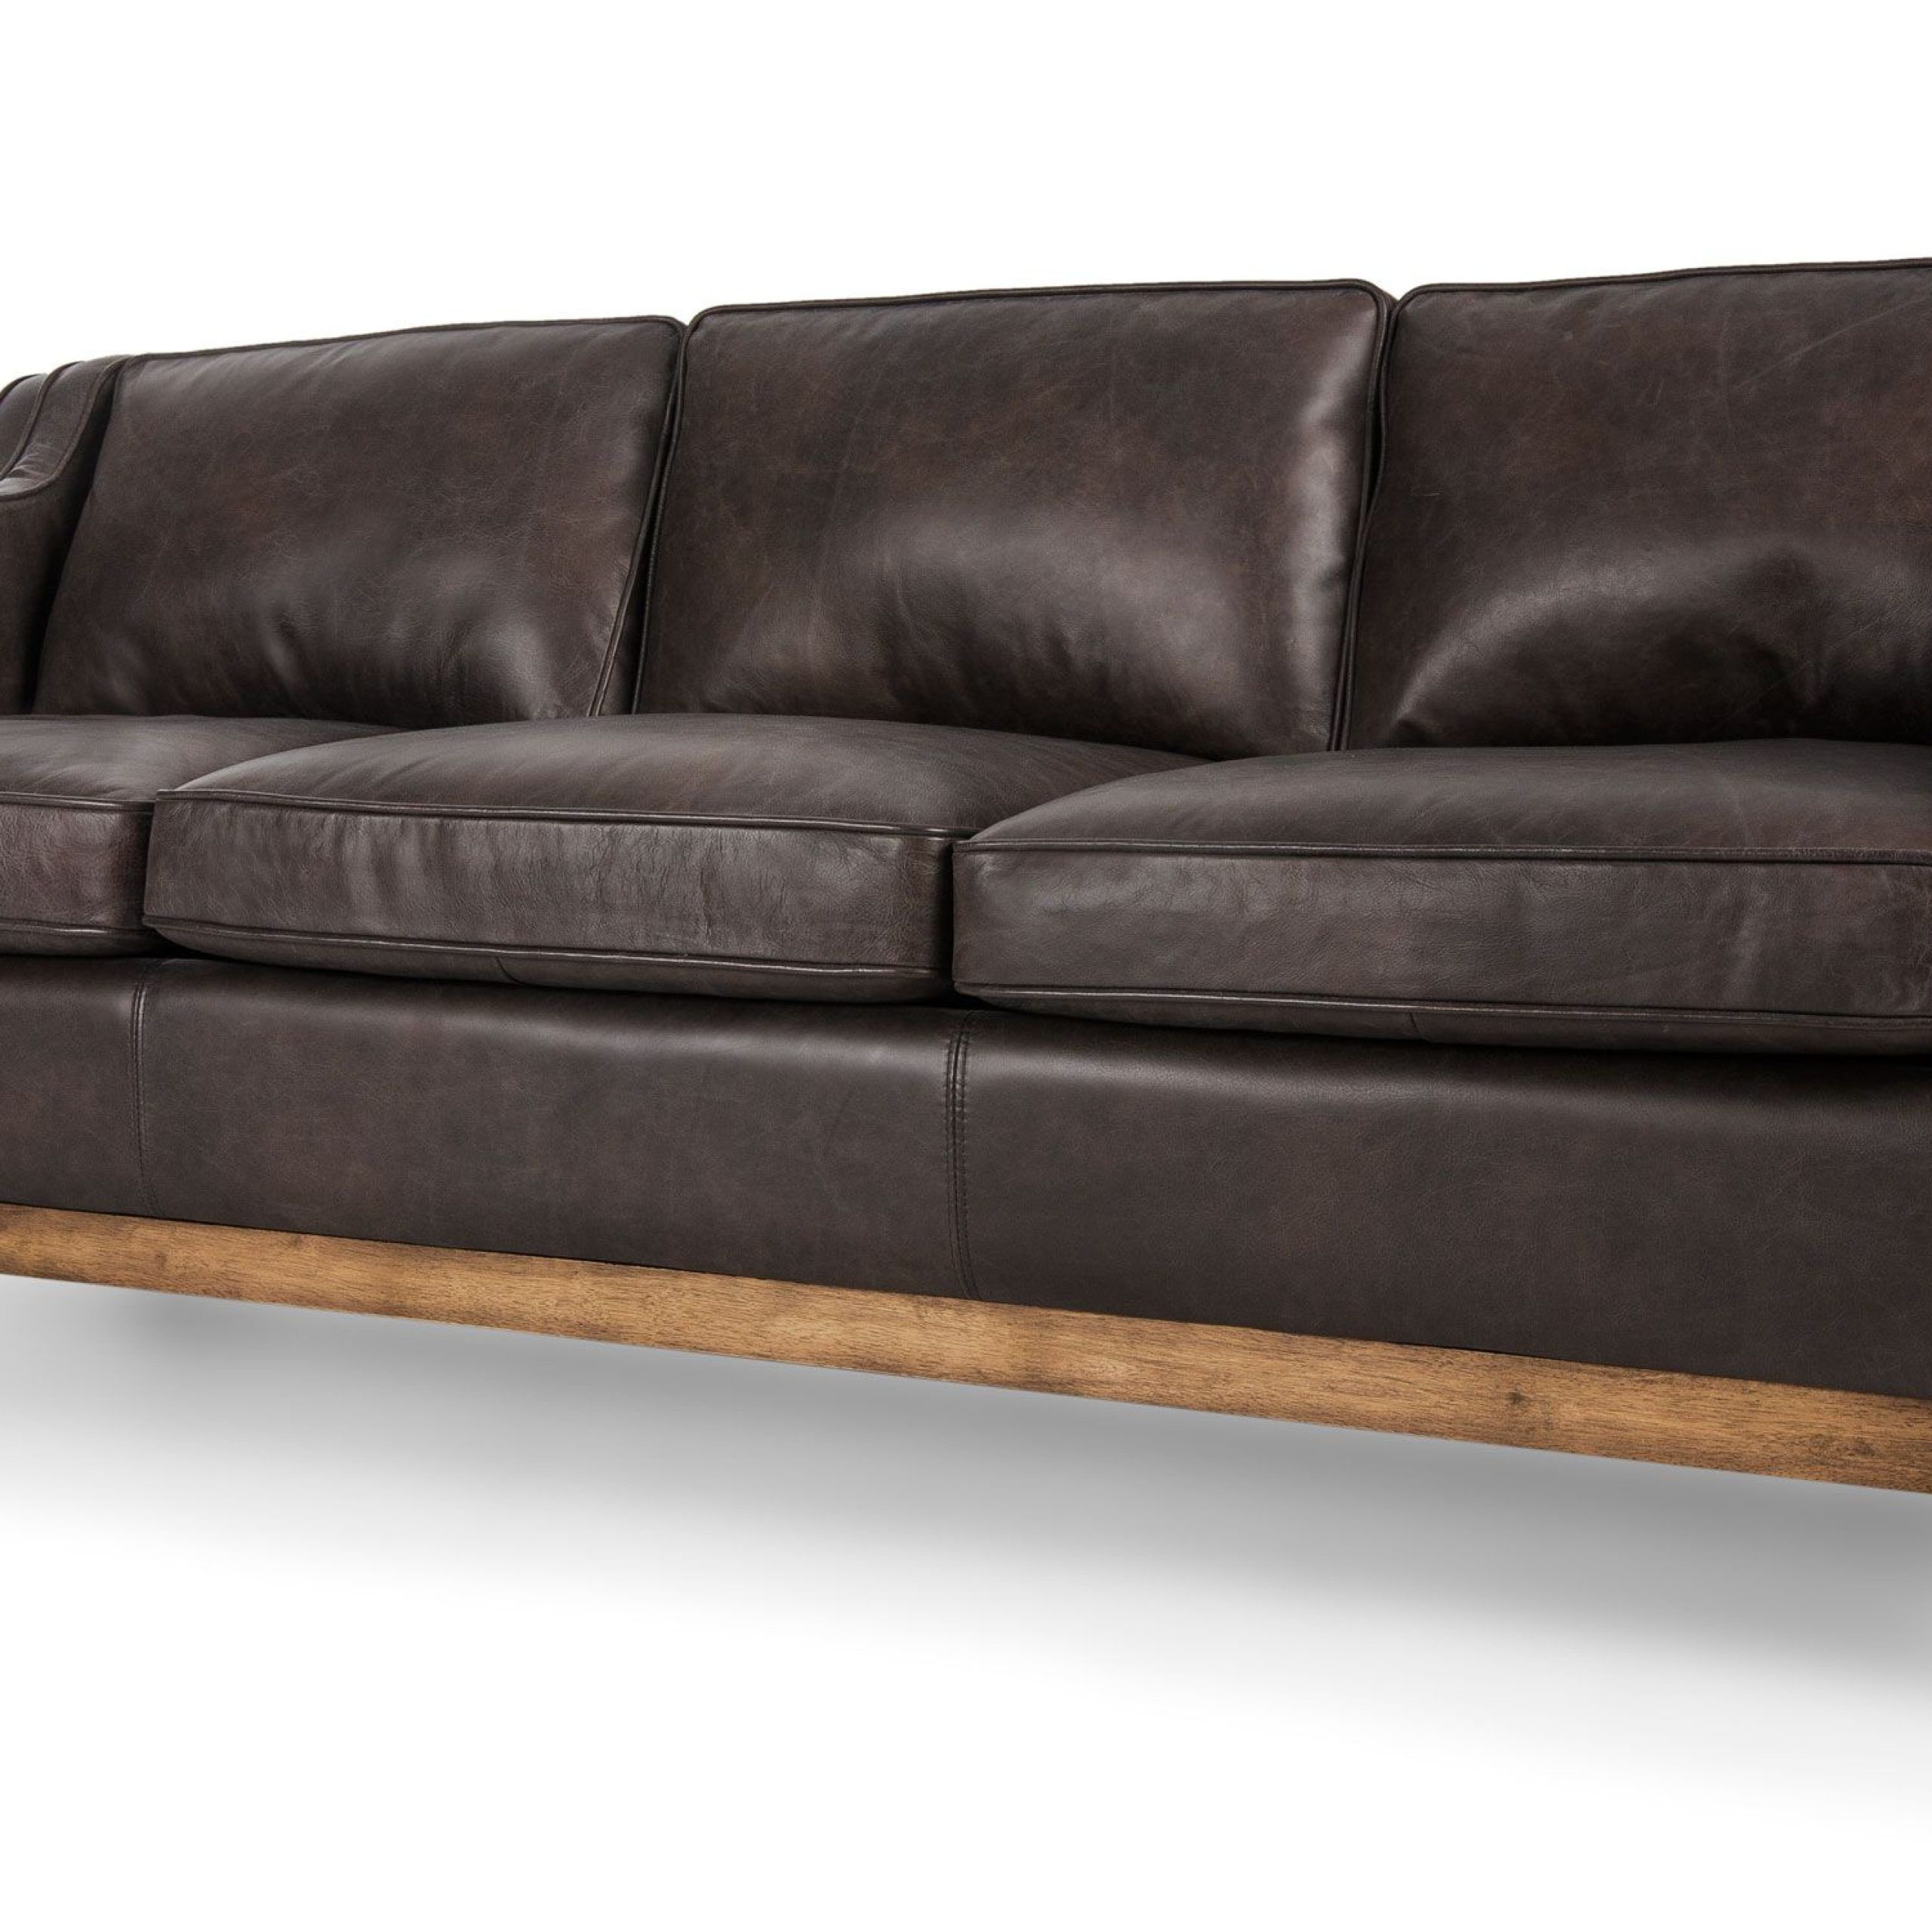 Worthington Oxford Brown Sofa – Sofas & Ottomans – Bryght | Modern, Mid Inside Sofas With Ottomans In Brown (View 13 of 20)